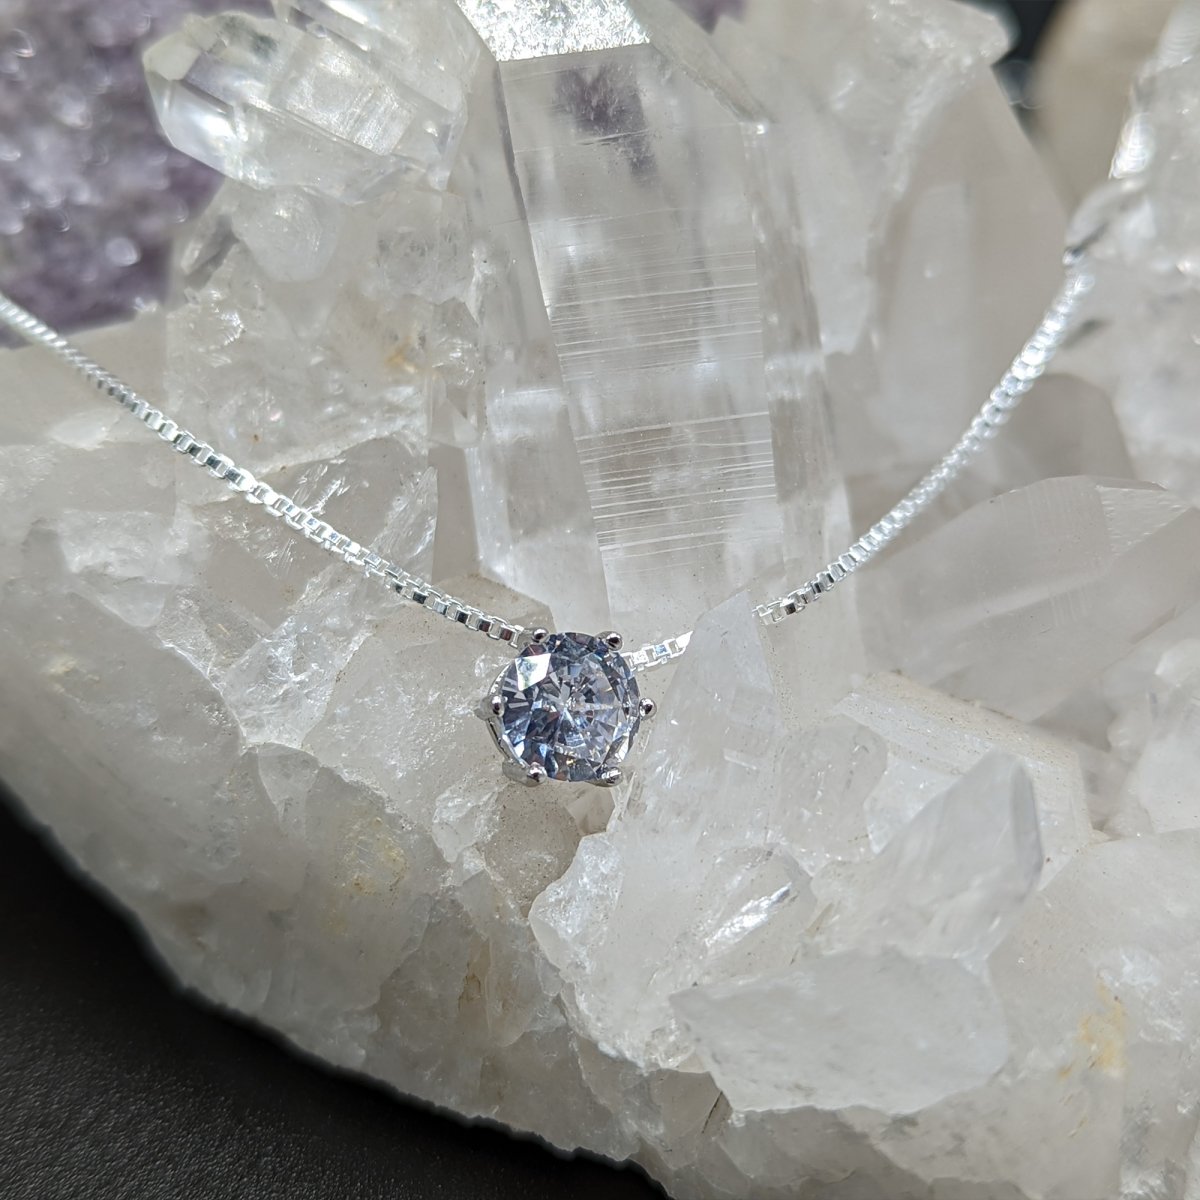 Gift for Grandma - Dainty CZ Sterling Silver Necklace - Meaningful Cards